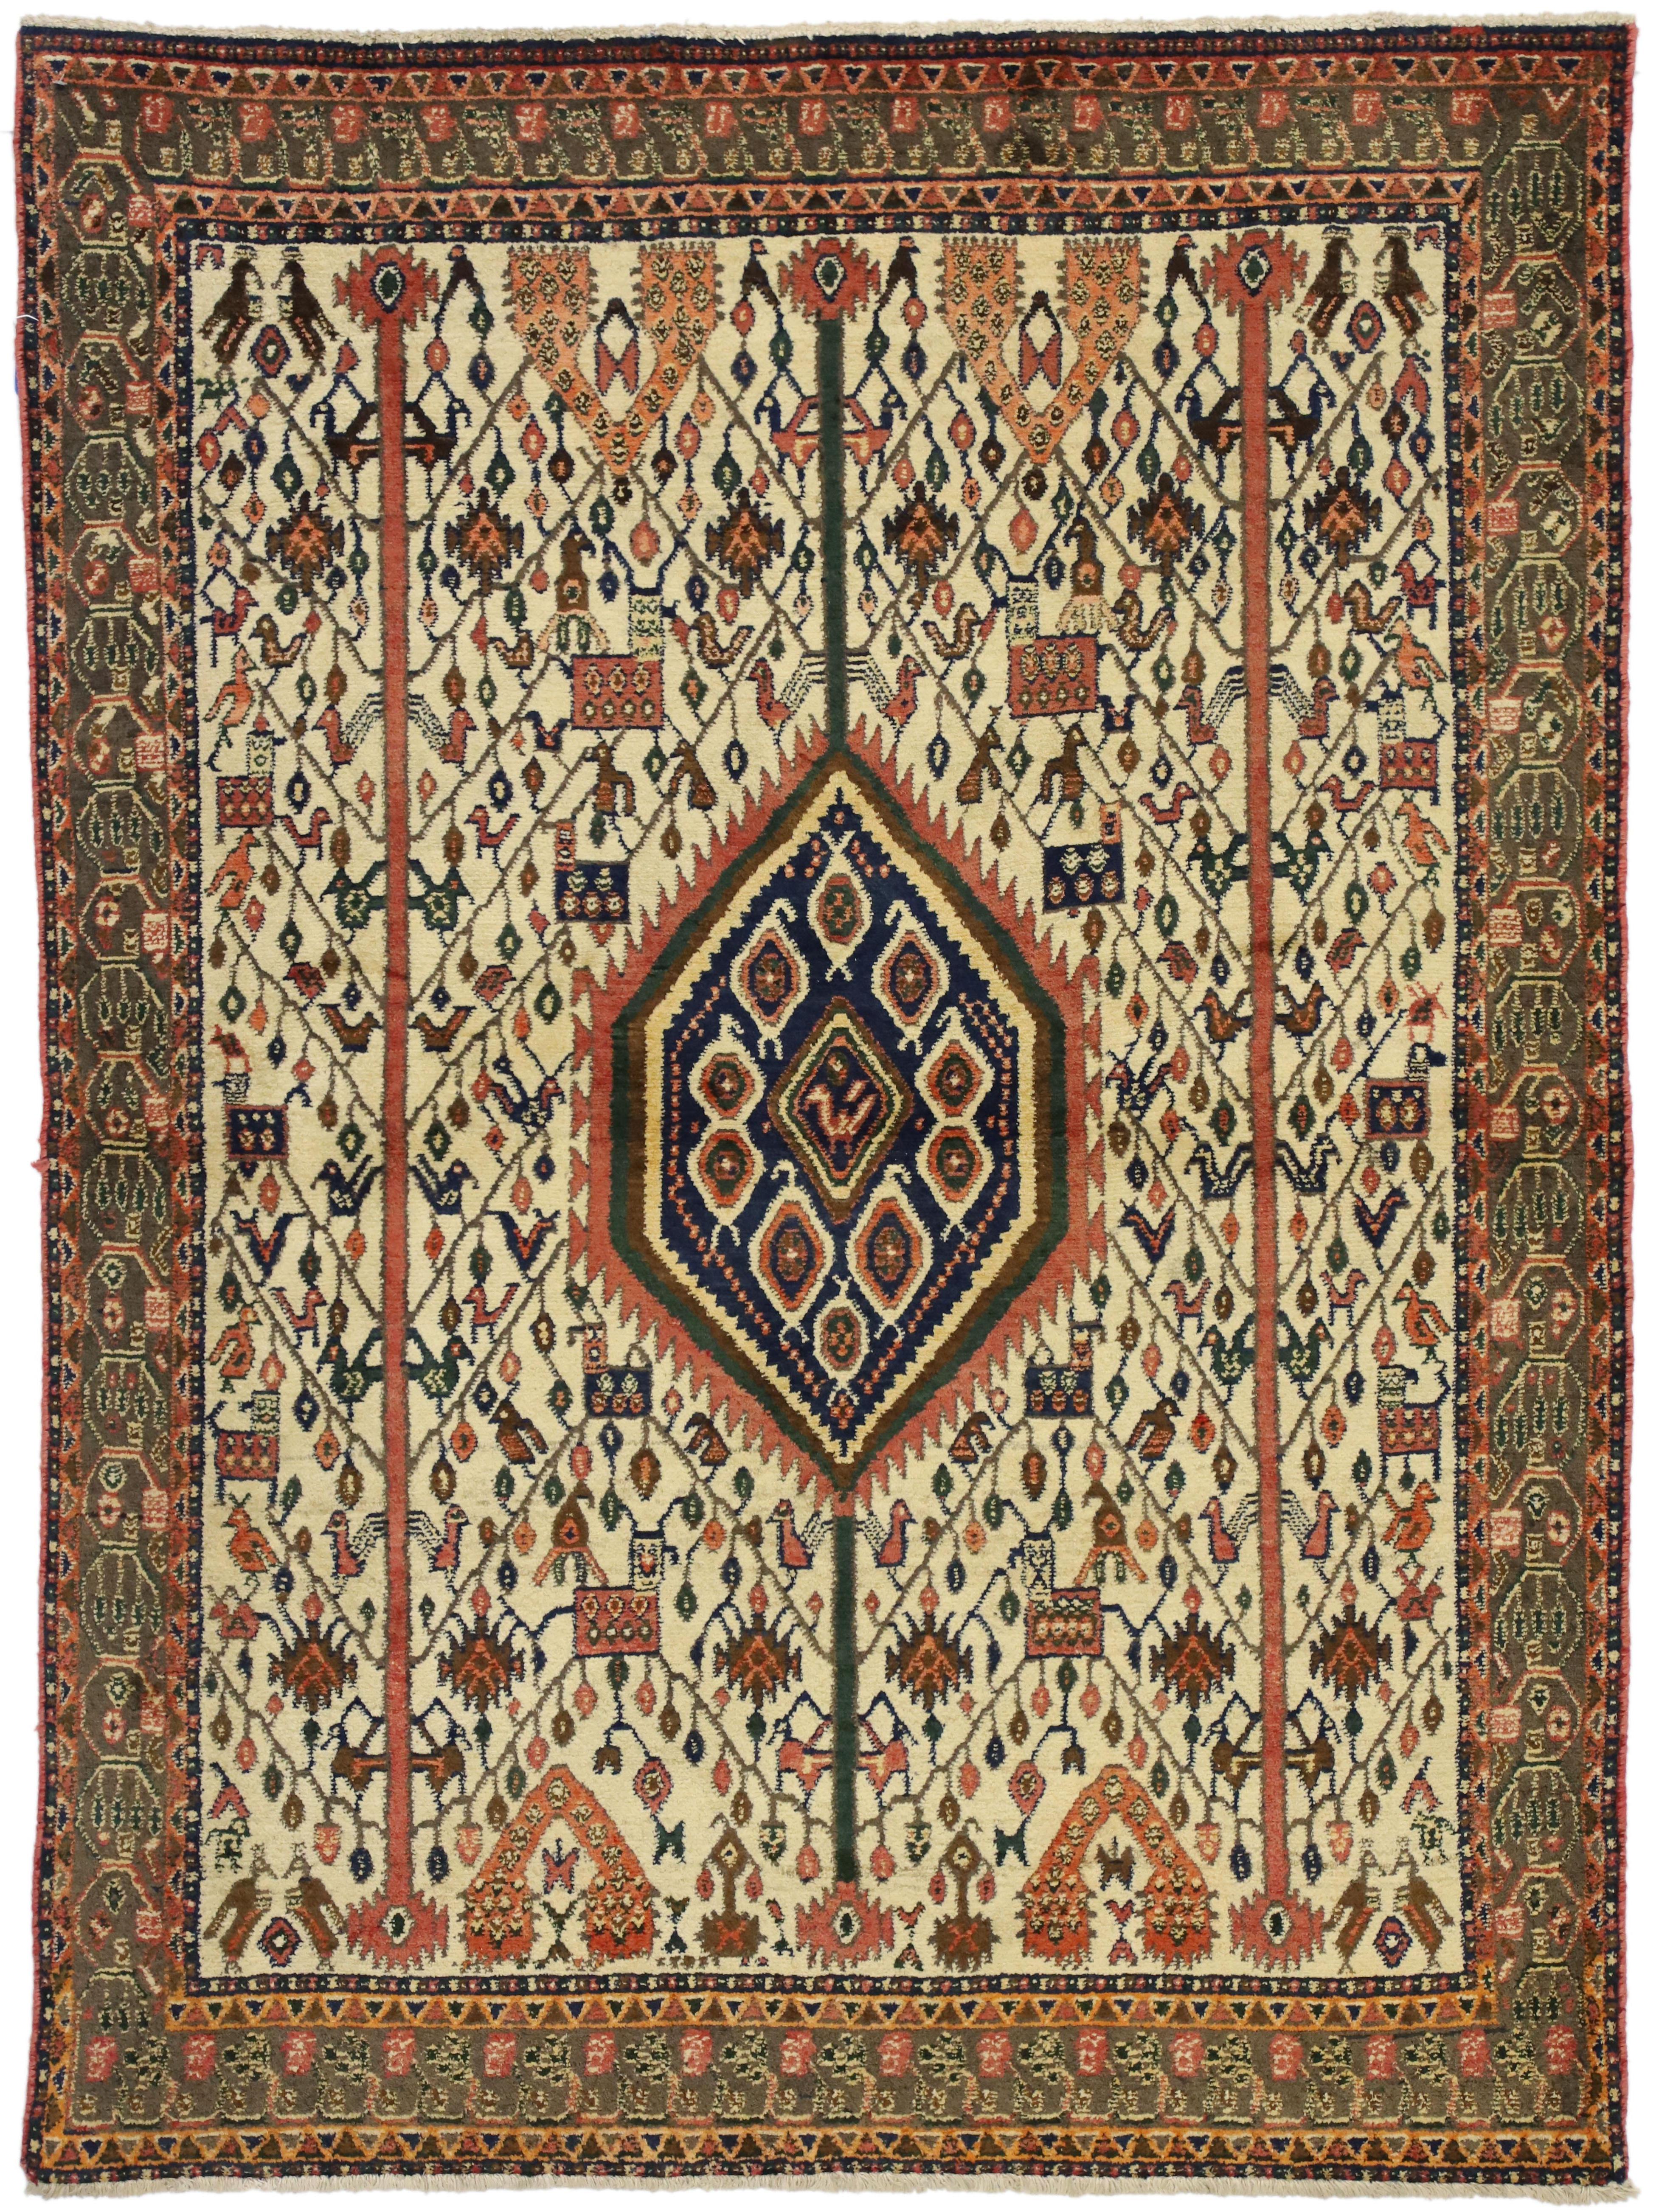 75232 vintage Persian Afshar Accent rug with Tree of Life and Nomadic Tribal style. This hand knotted wool vintage Persian Afshar accent rug beautifully showcases a bird and tree of life design with a nomadic tribal style. The vintage Afshar carpet